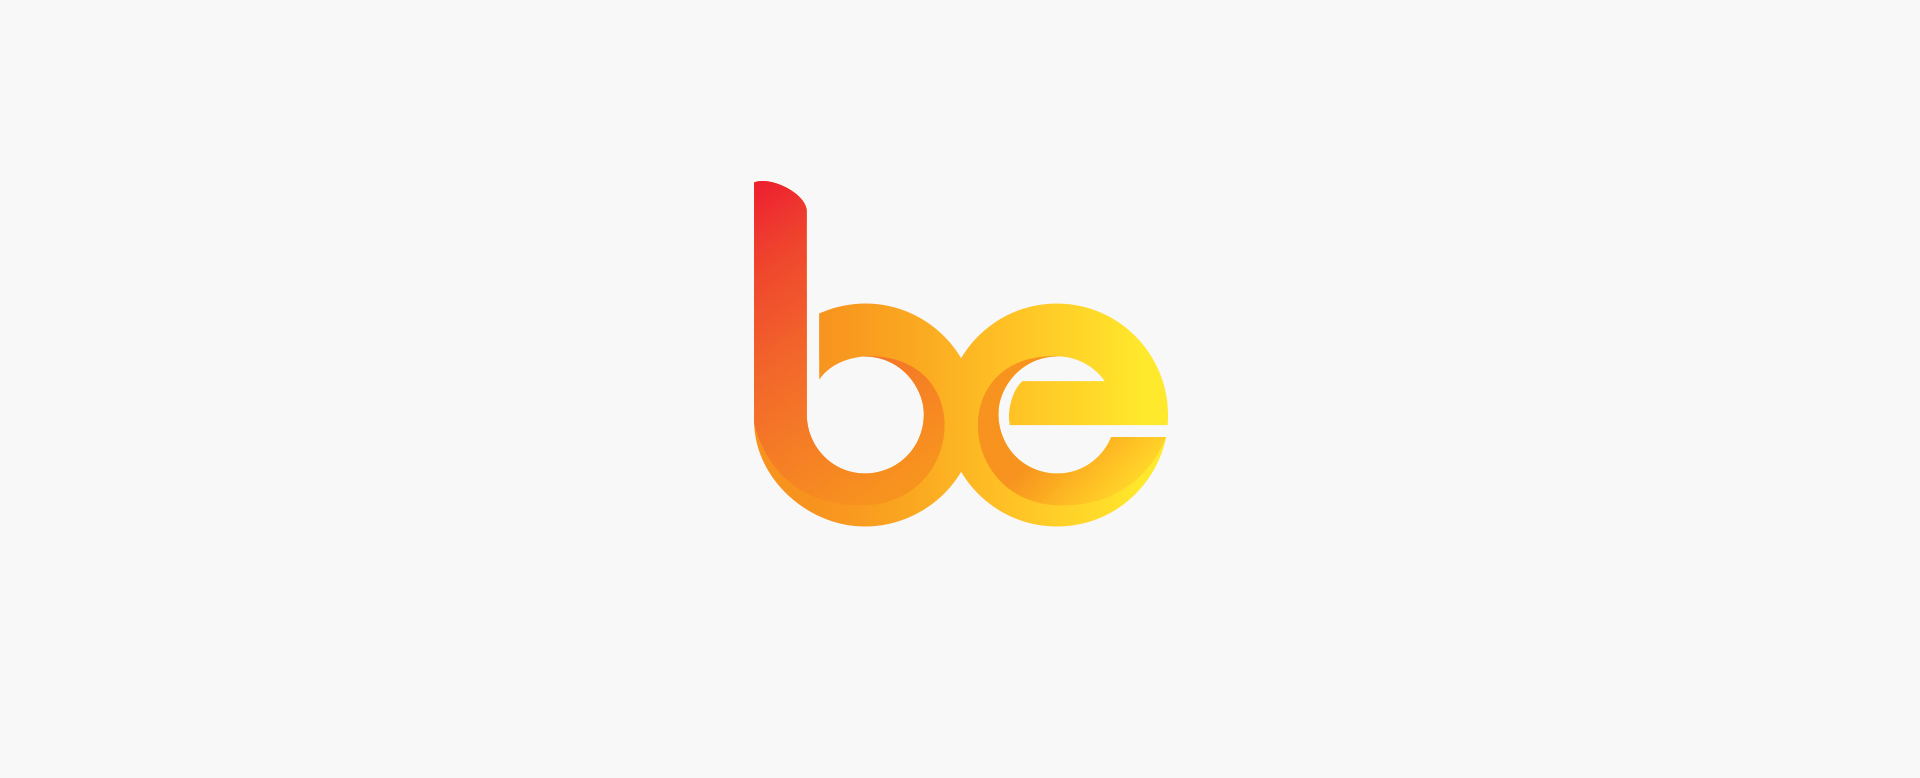 Be logo design created by Incubate Design for Amway